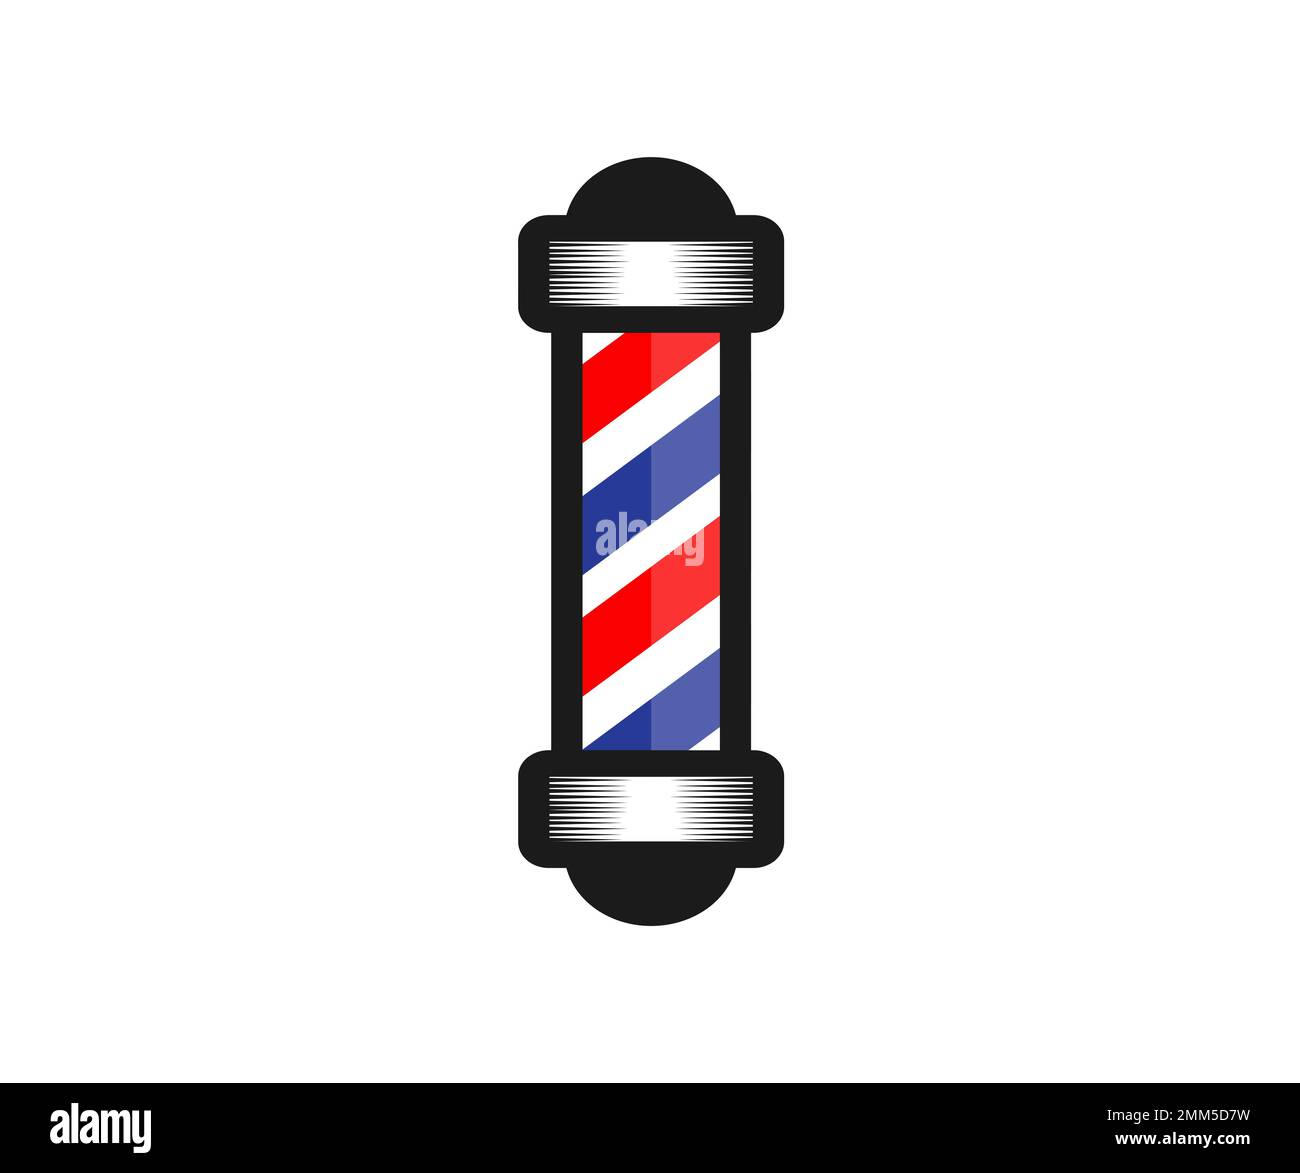 Barber Pole Vector Art, Icons, and Graphics for Free Download